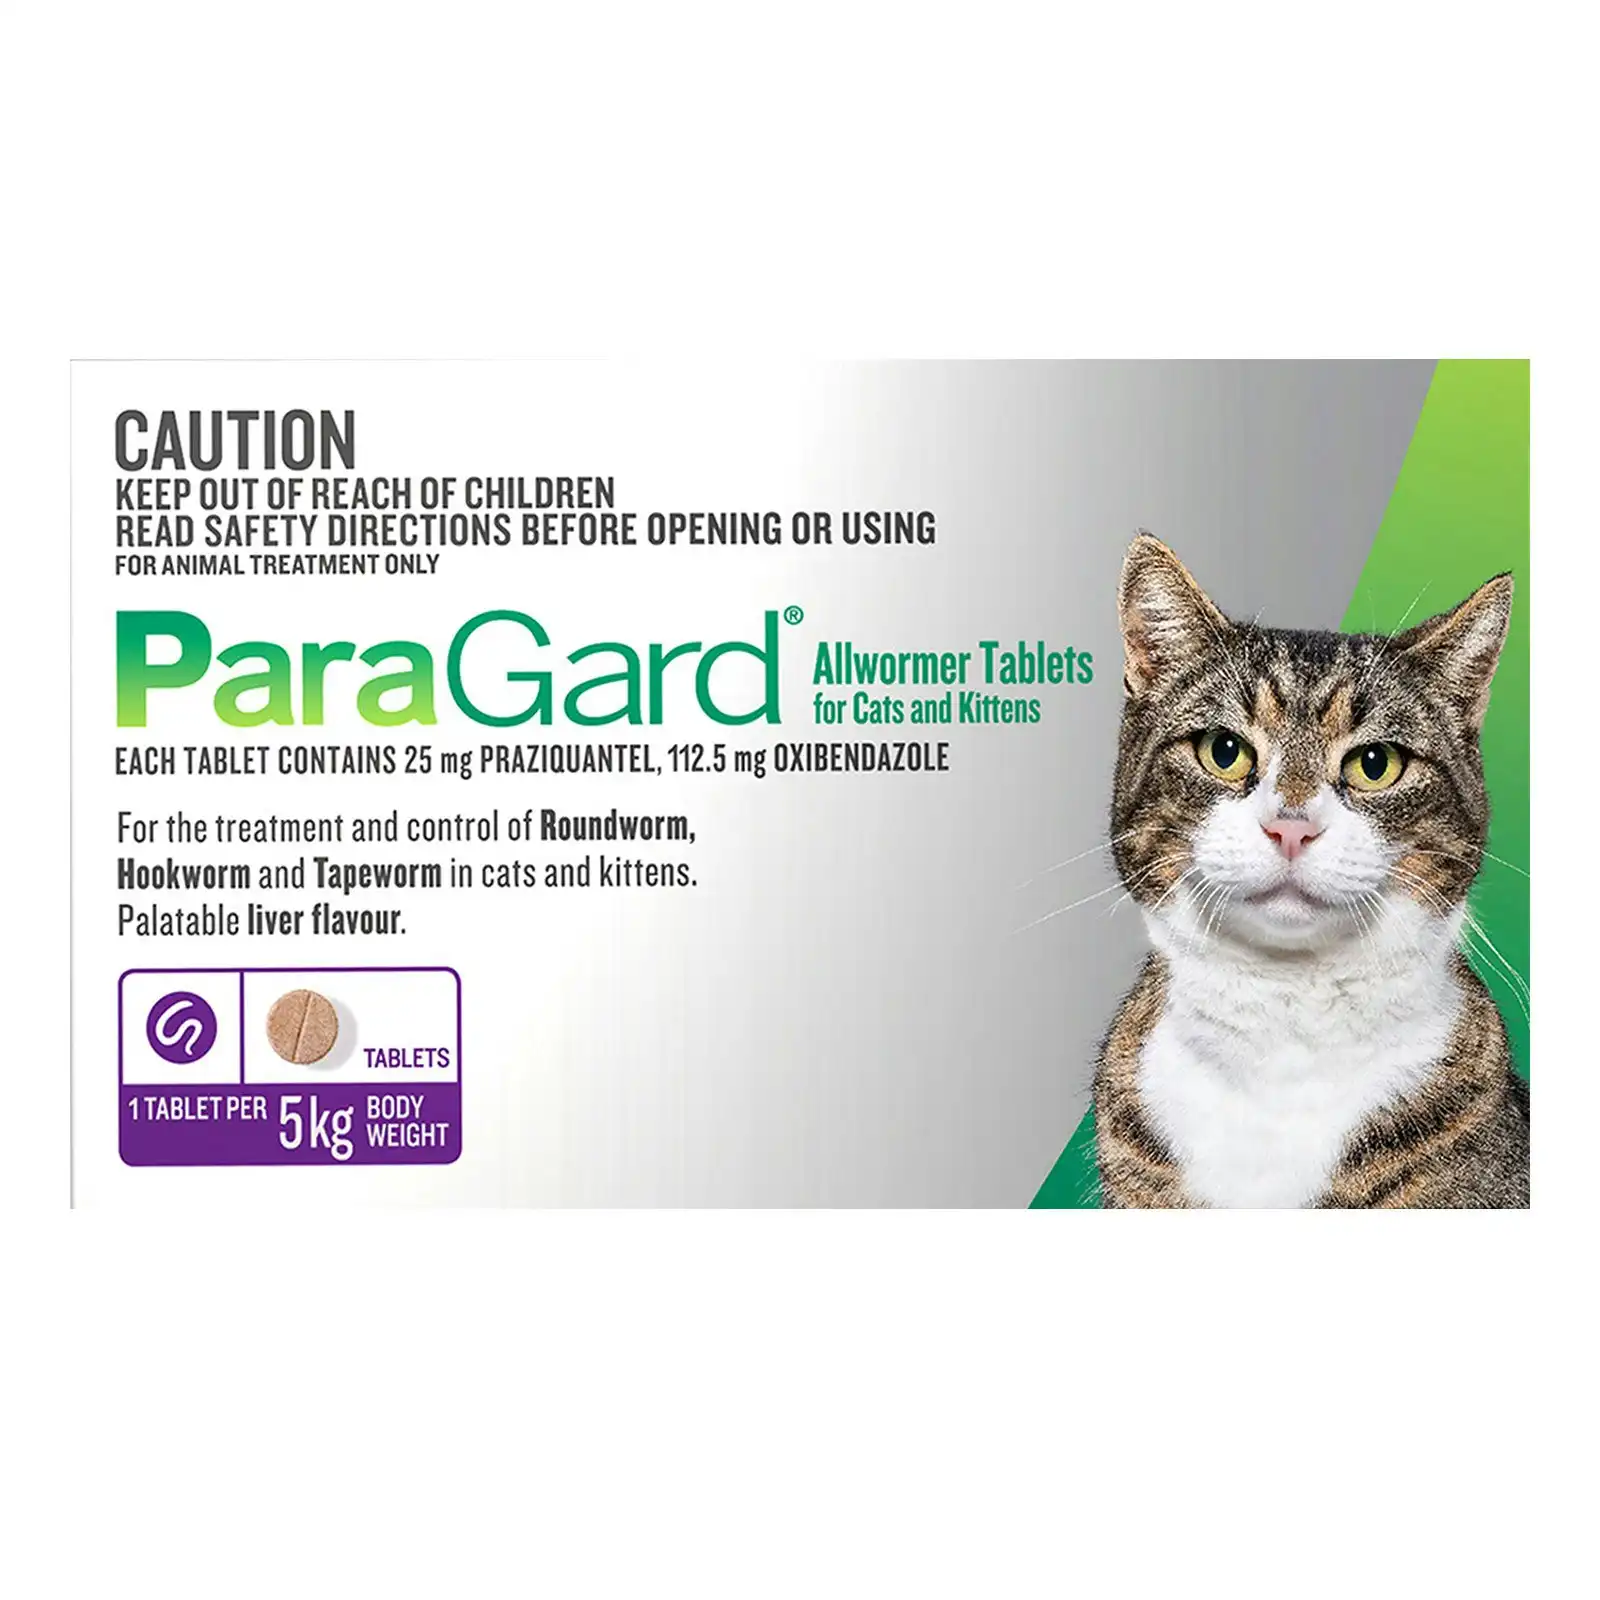 Paragard Allwormer Tablets For Cats and Kittens 5 Kg 4 Tablets PURPLE